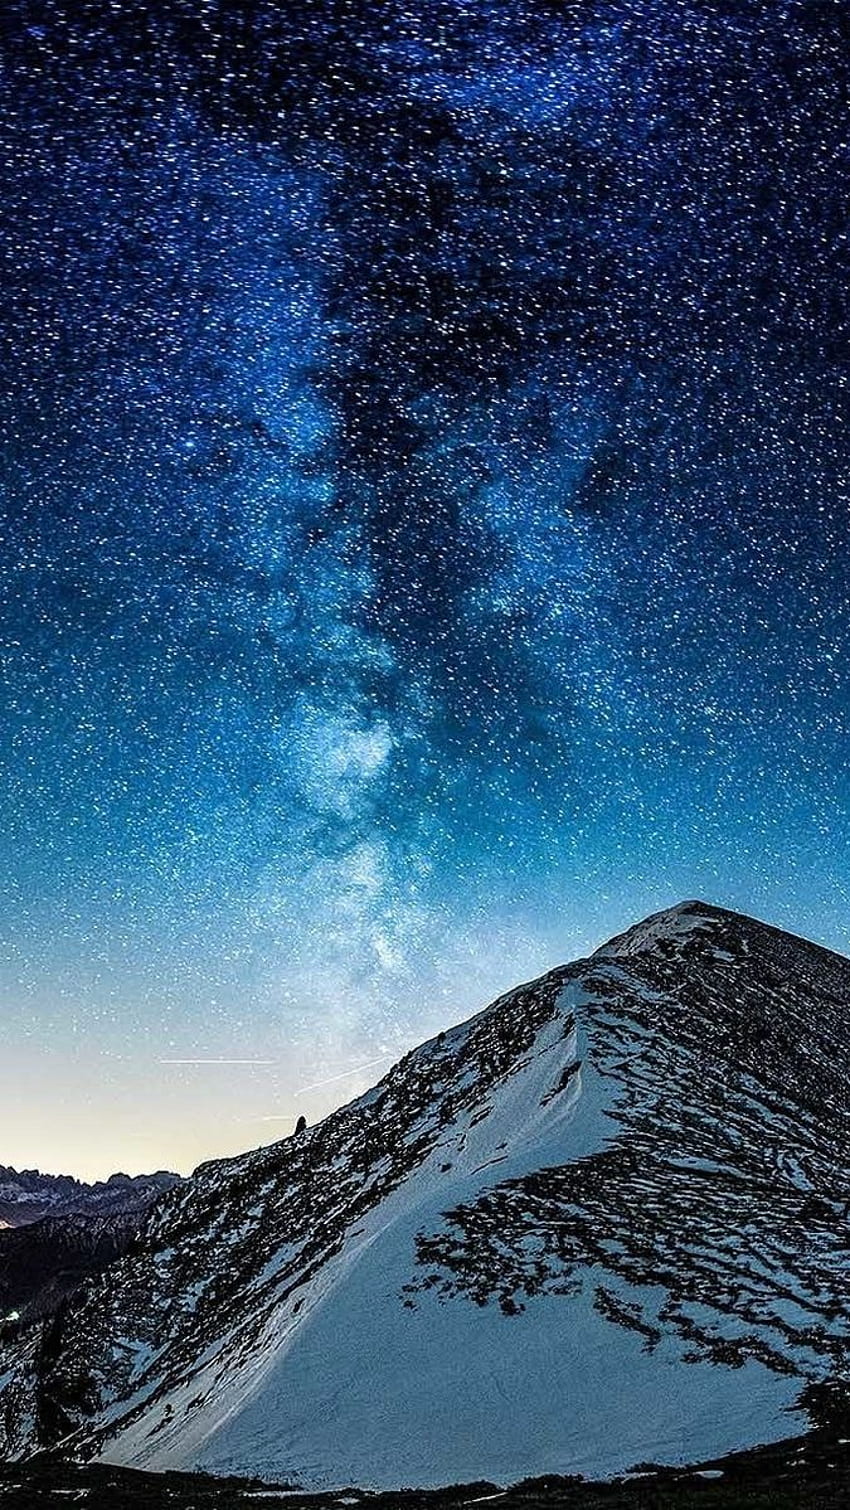 Milky Way Galaxy View From Mountain IPhone IPhone : IPhone , Milky Way iPhone HD phone wallpaper